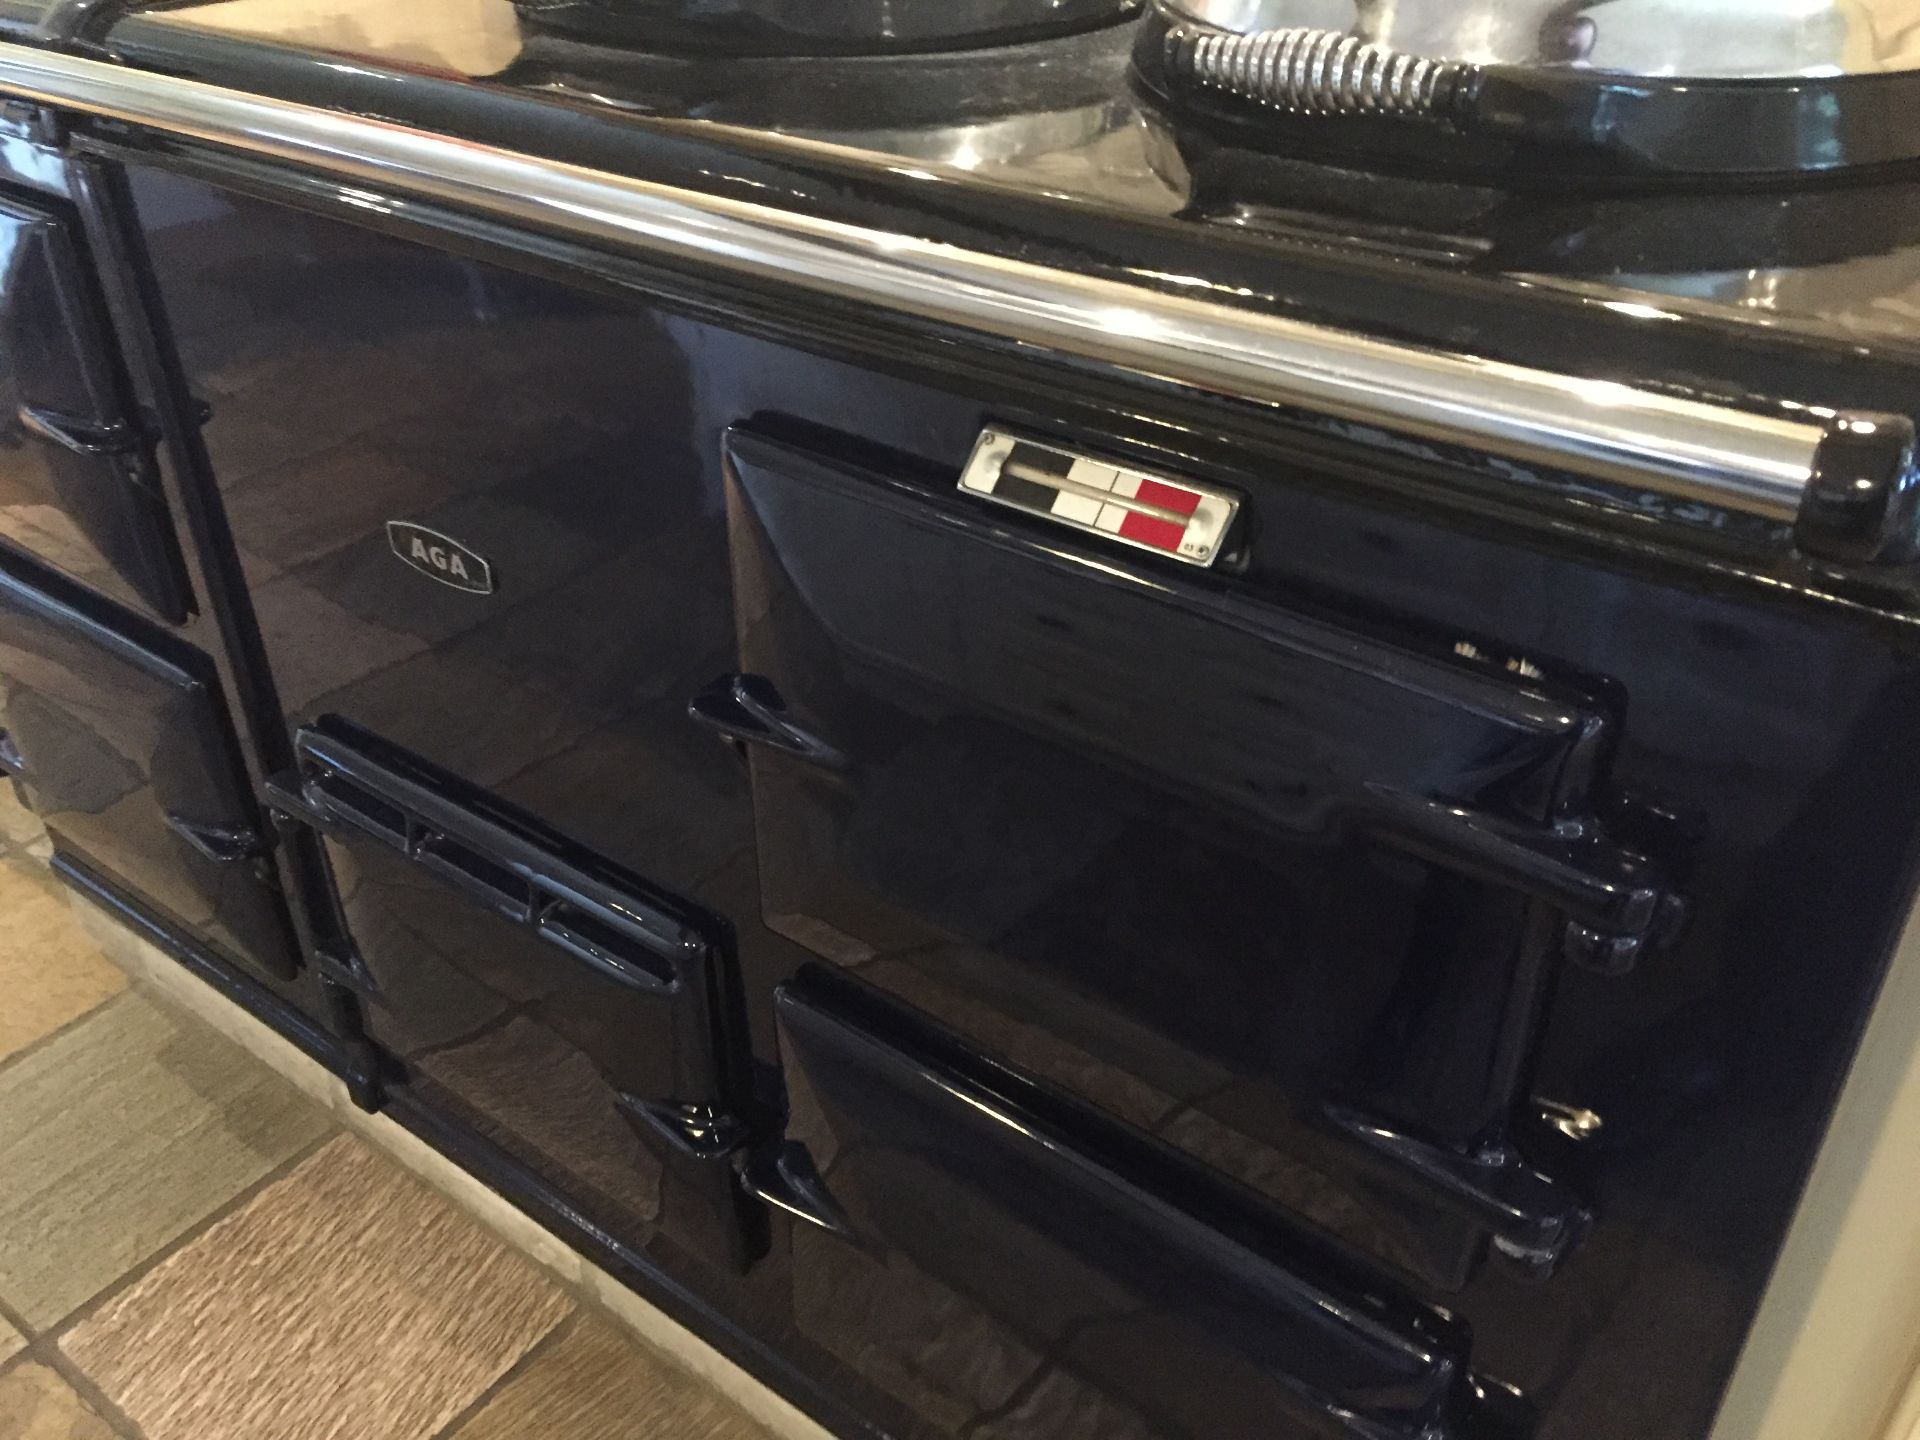 1 x Aga 4-Oven, 3-Plate Dual-Fuel Range Cooker - Cast Iron With Navy Enamel Finish With A Black Top - Image 2 of 21